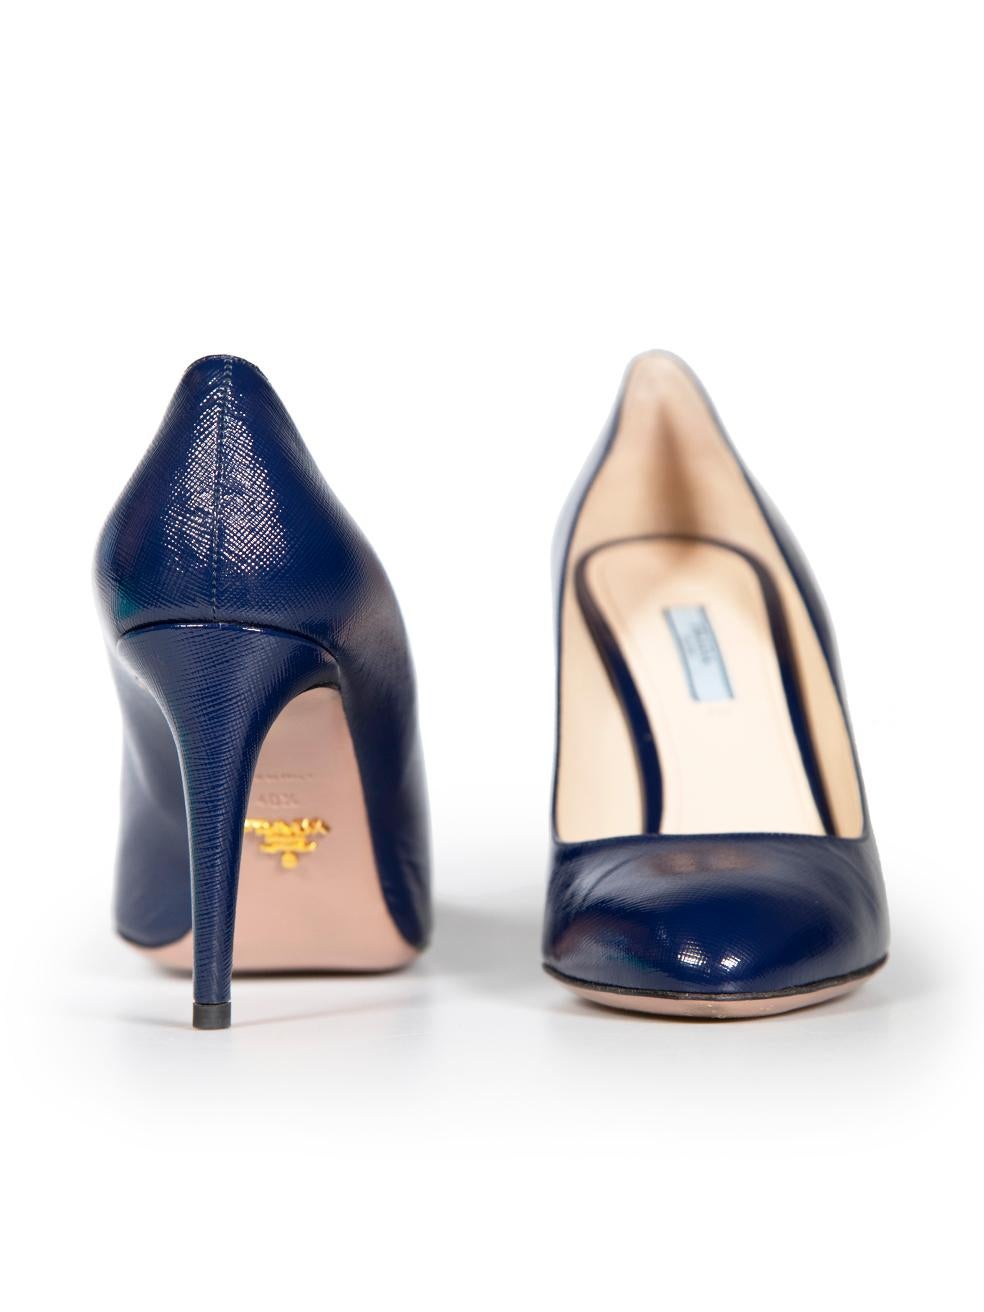 Prada Navy Patent Saffiano Leather Pumps Size IT 40.5 In Good Condition For Sale In London, GB